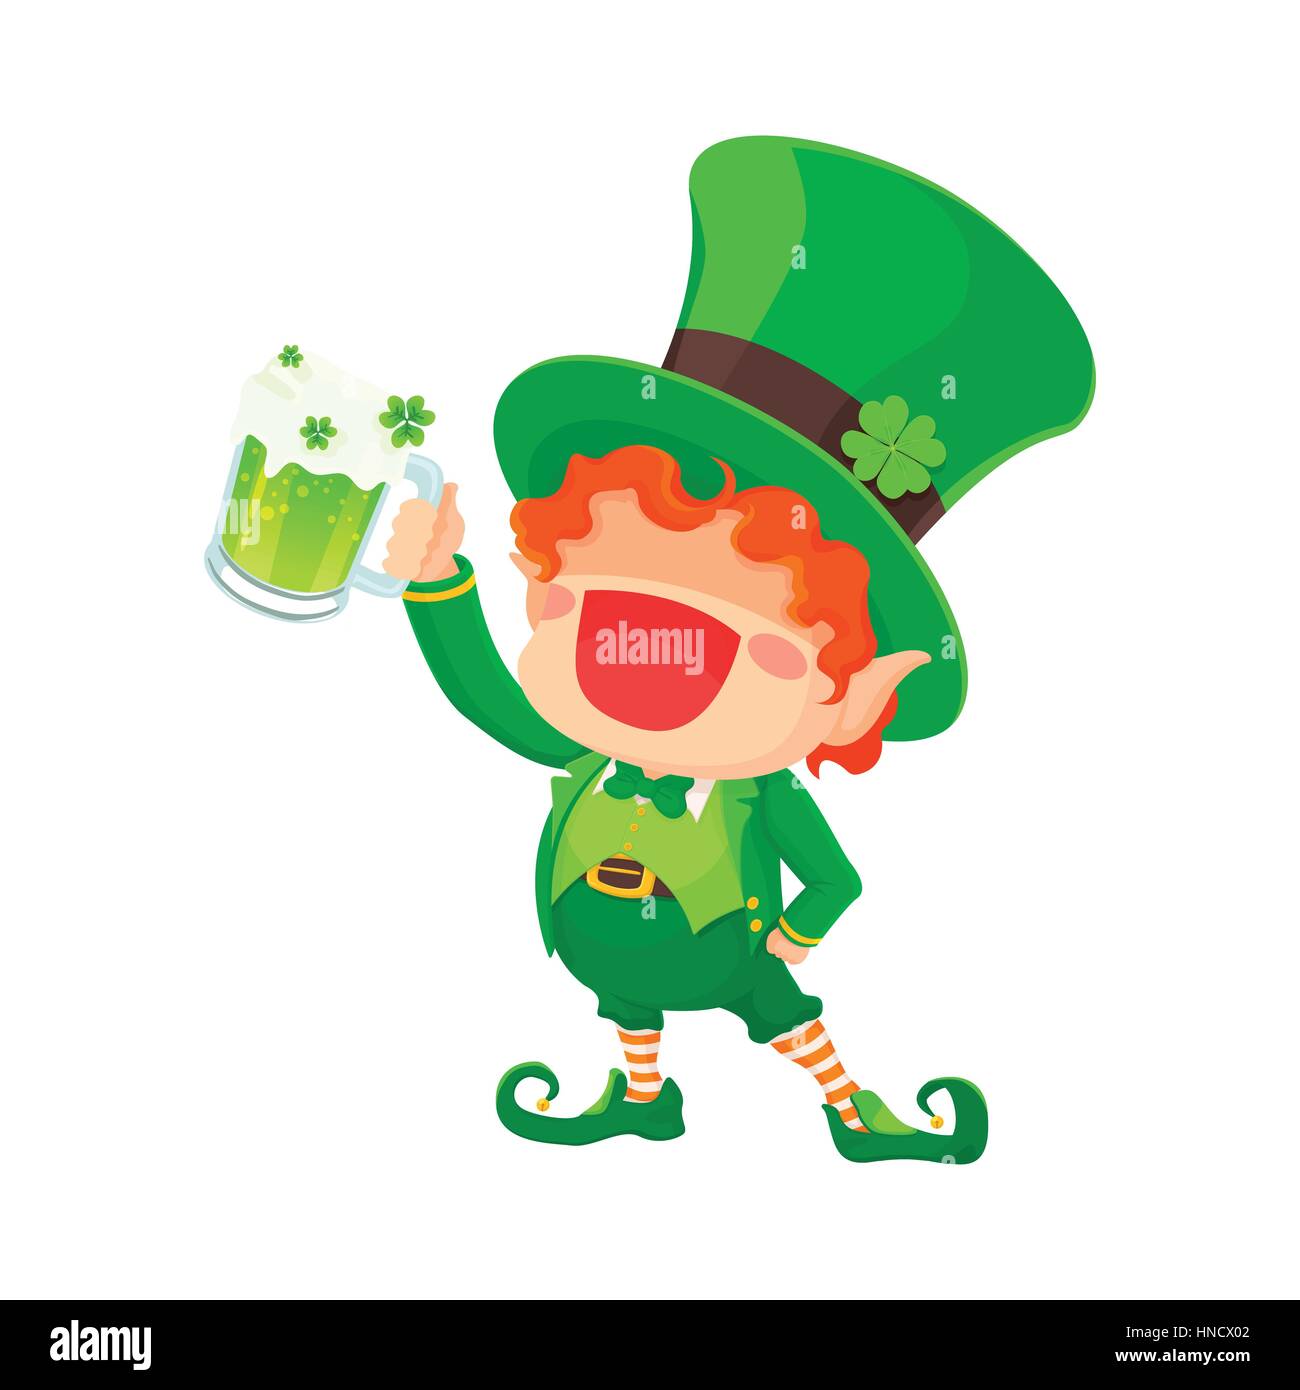 Vector Illustration of St. Patrick's Day Happy Leprechaun With Mug of Green Beer for Greeting Card. Stock Vector